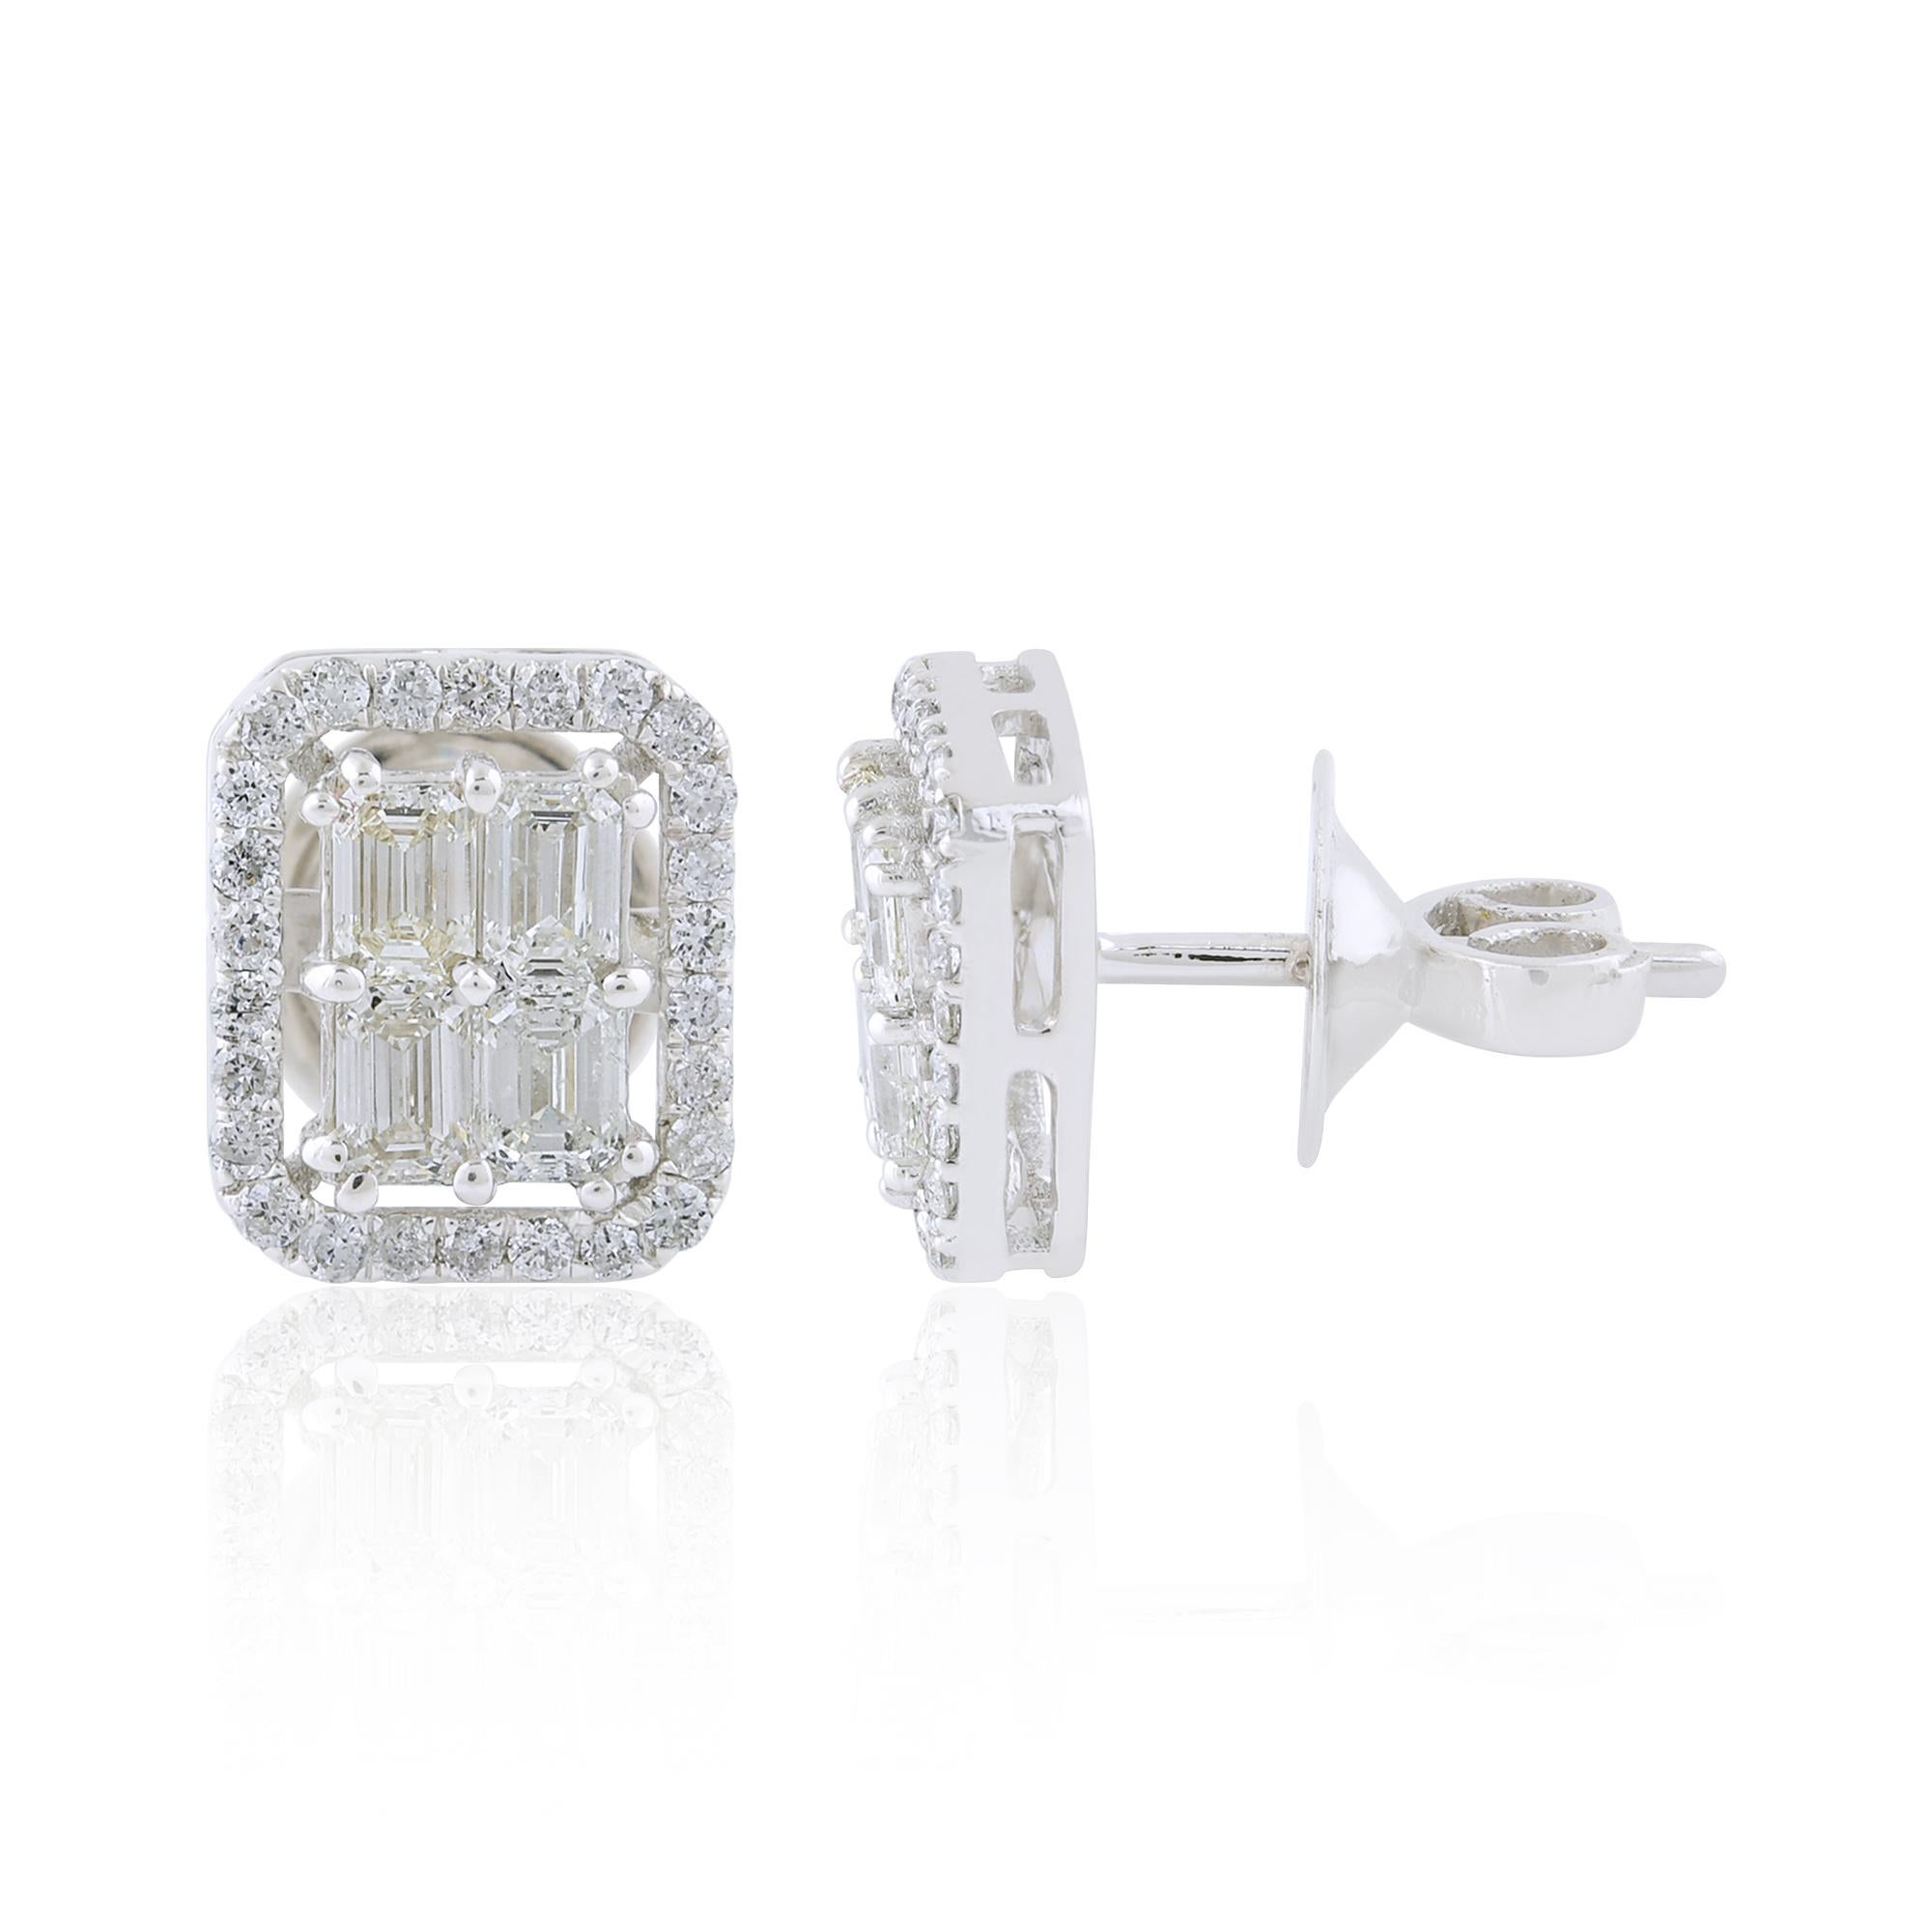 Item Code :- SEE-11961A
Gross Weight :- 3.14 gm
18k White Gold Weight :- 2.92 gm
Diamond Weight :- 1.08 Carat ( AVERAGE DIAMOND CLARITY SI1-SI2 & COLOR H-I )
Earrings Size :- 10x9 mm approx.
✦ Sizing
.....................
We can adjust most items to